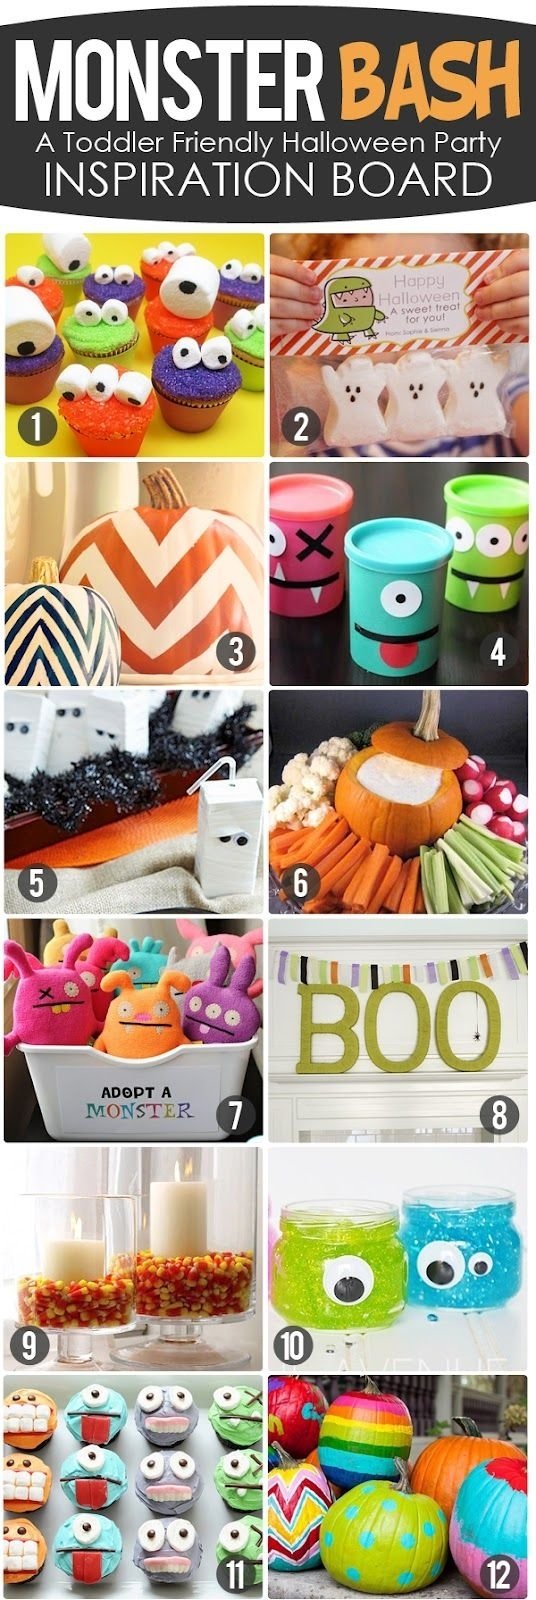 10 Great Kids Halloween Birthday Party Ideas the busy budgeting mama monster bash toddler friendly halloween 2 2022